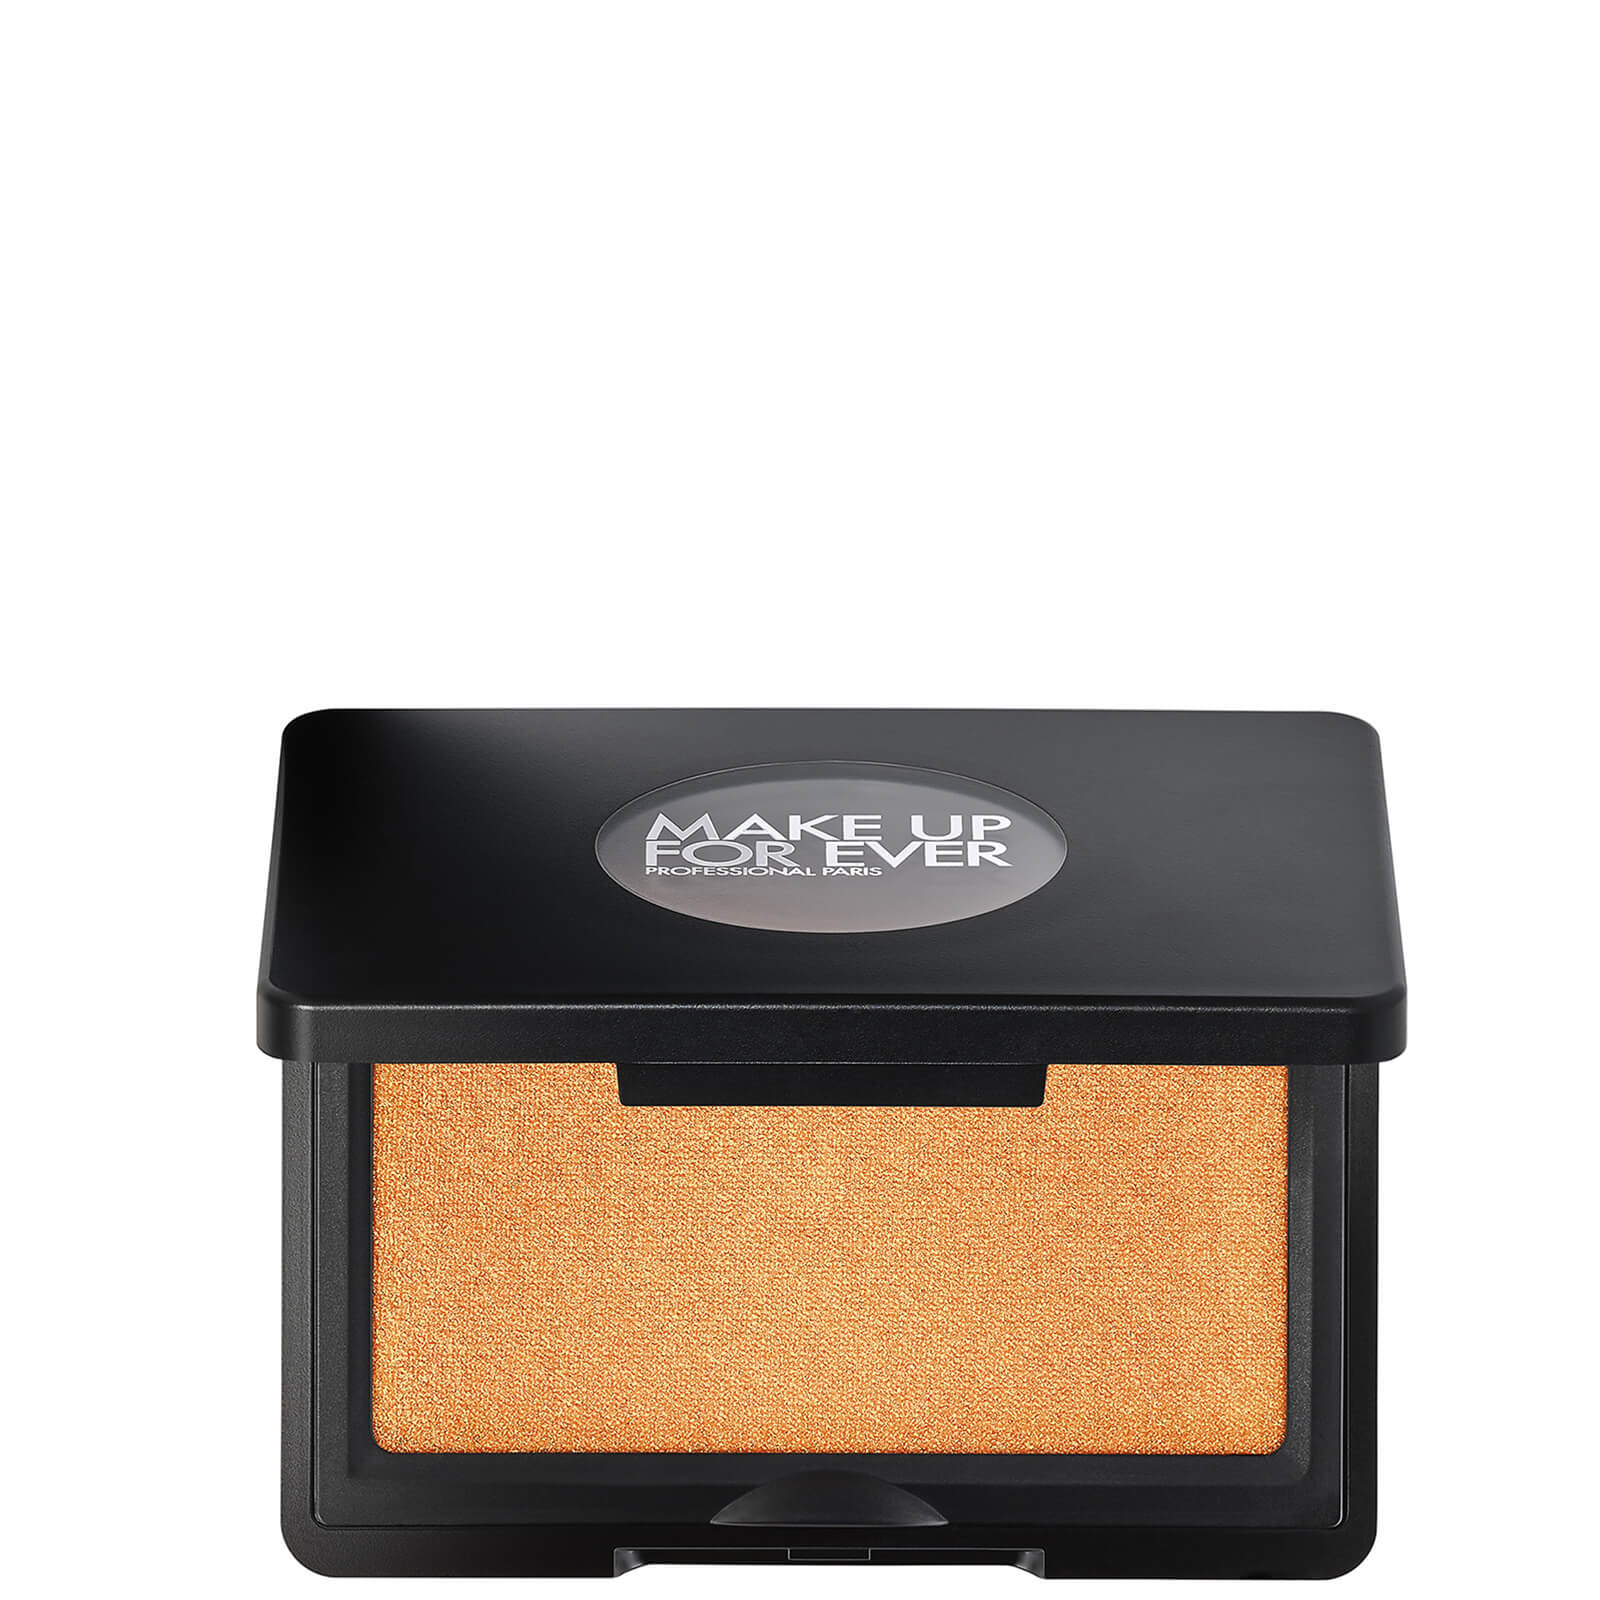 MAKE UP FOR EVER Artist Face Powders Highlighter 4g (Various Shades) - H150 - Major Gold